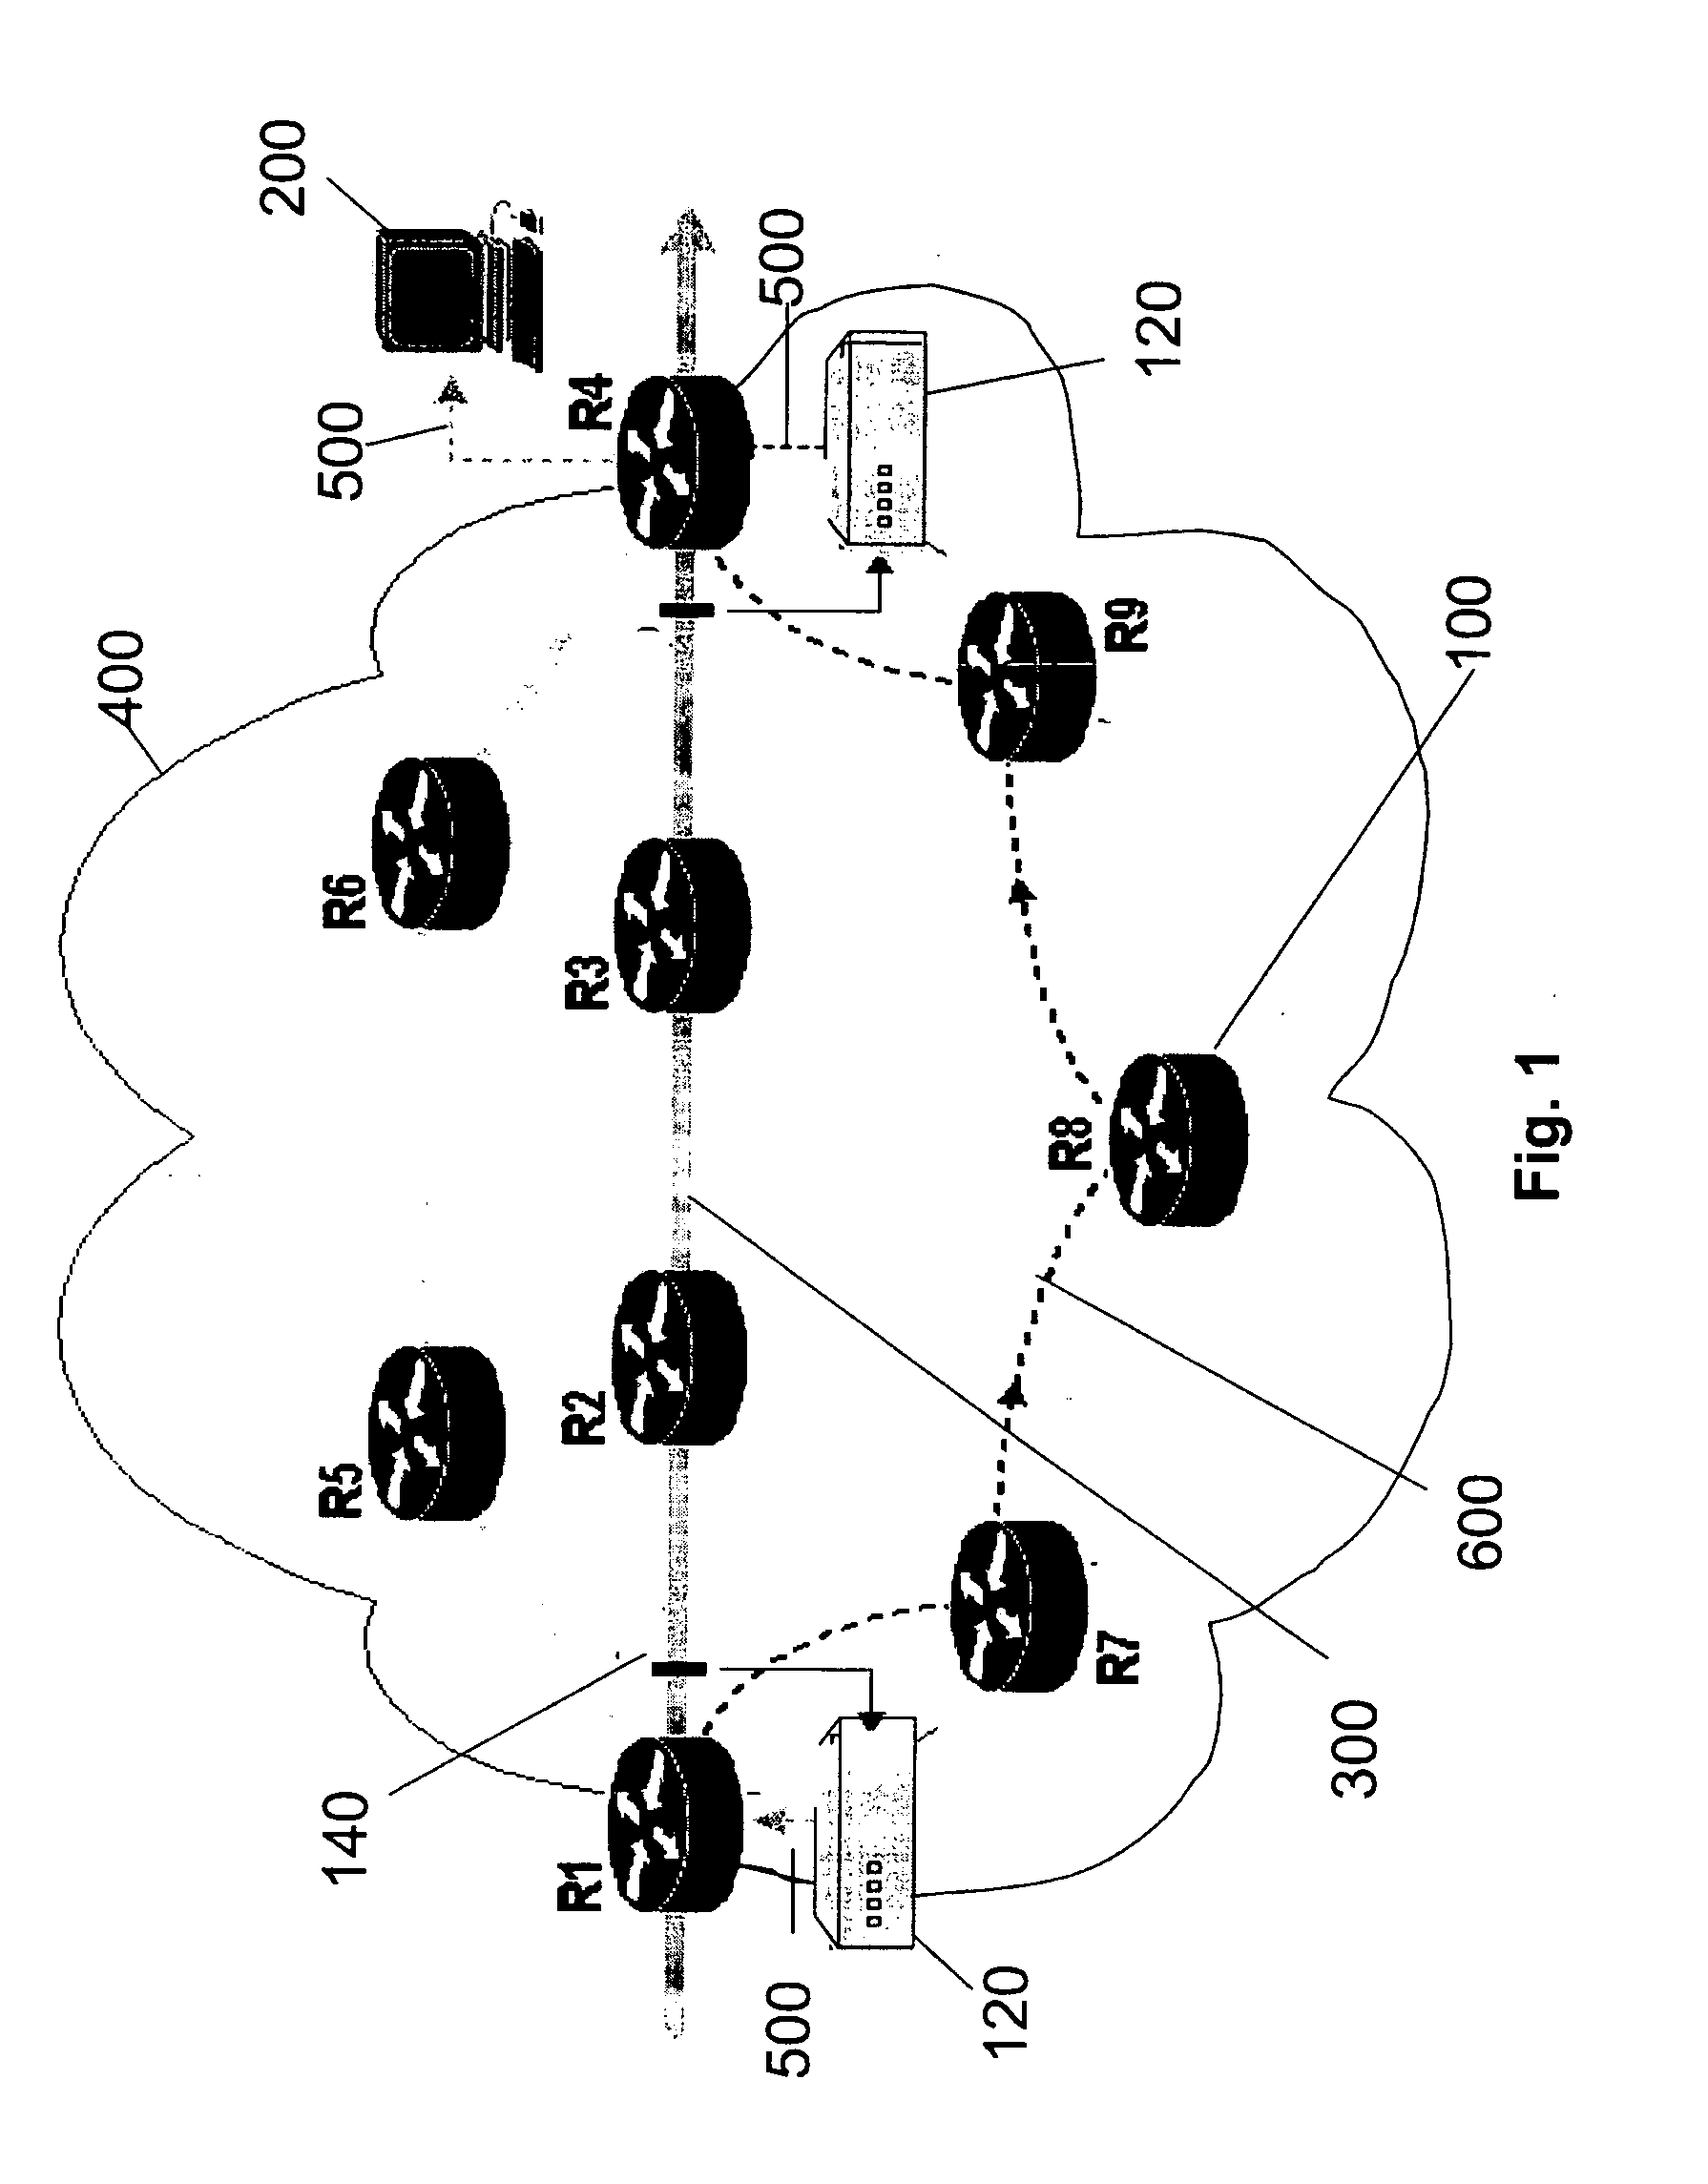 Packet trace diagnostic system